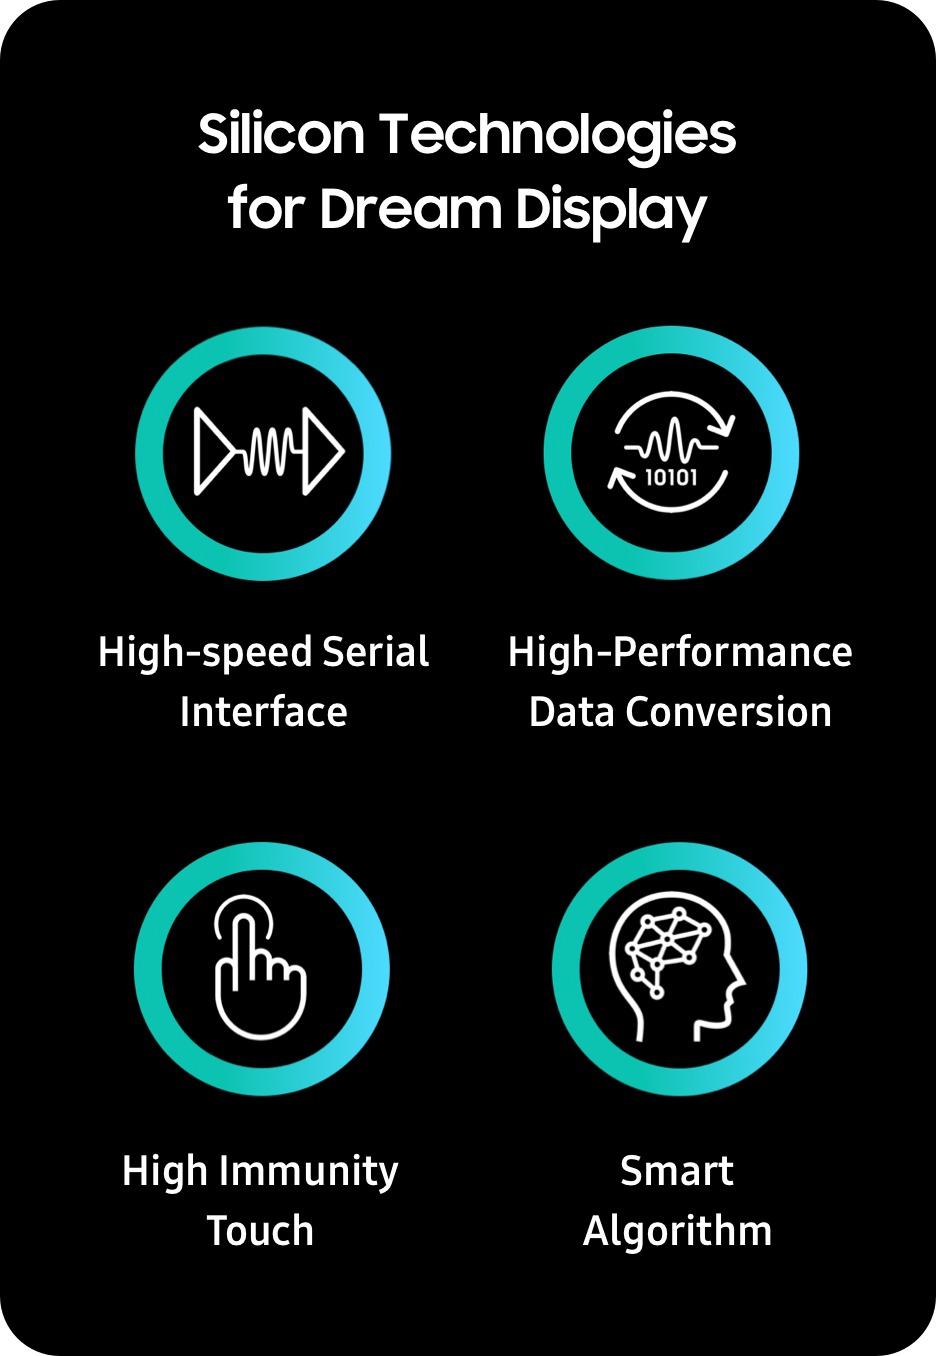 Four silicon technologies for Samsung's dream display.